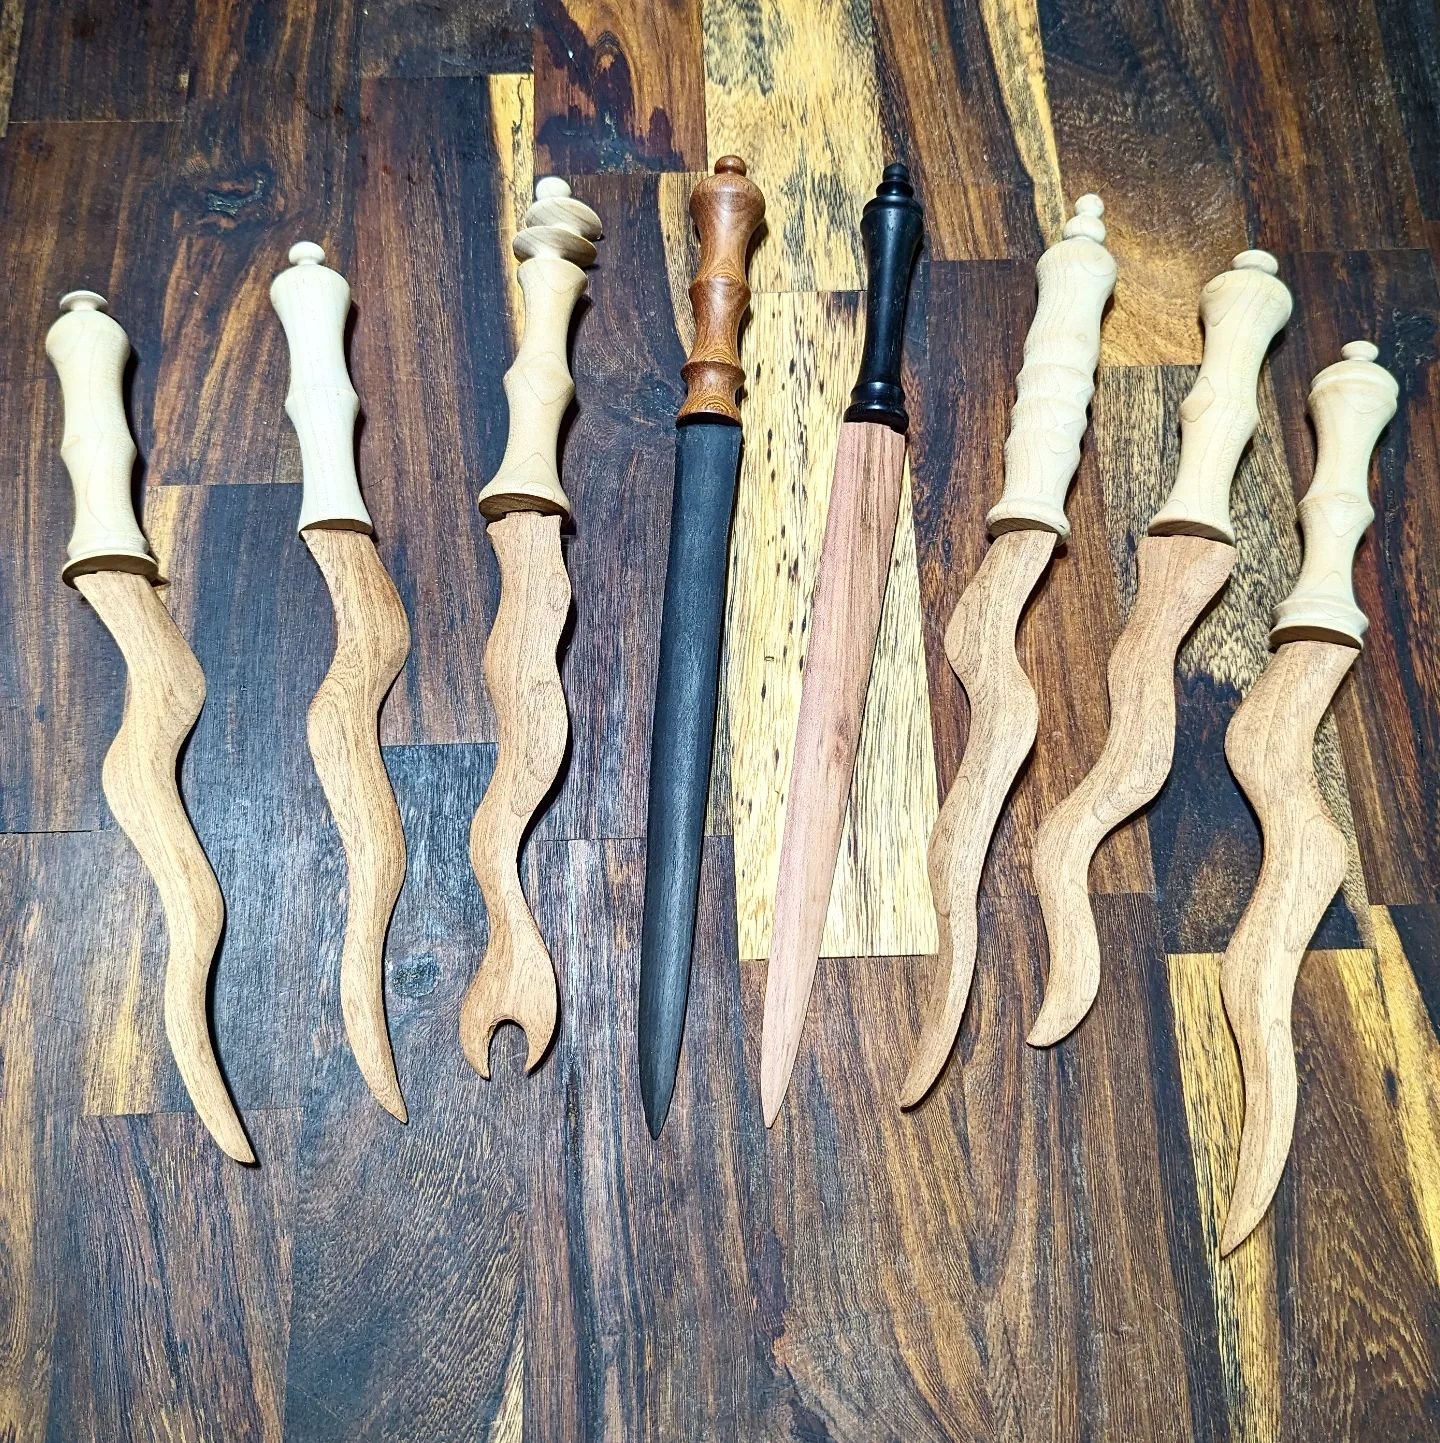 Some altar knives ready for glue up and finish. They will be for sale at @austinwitchfest this Sunday at Palmer Event Center from 10pm to 6 pm. Come on down and support local Austin witches, artists, and vendors.

#athame #altar #witch #handmade #kni